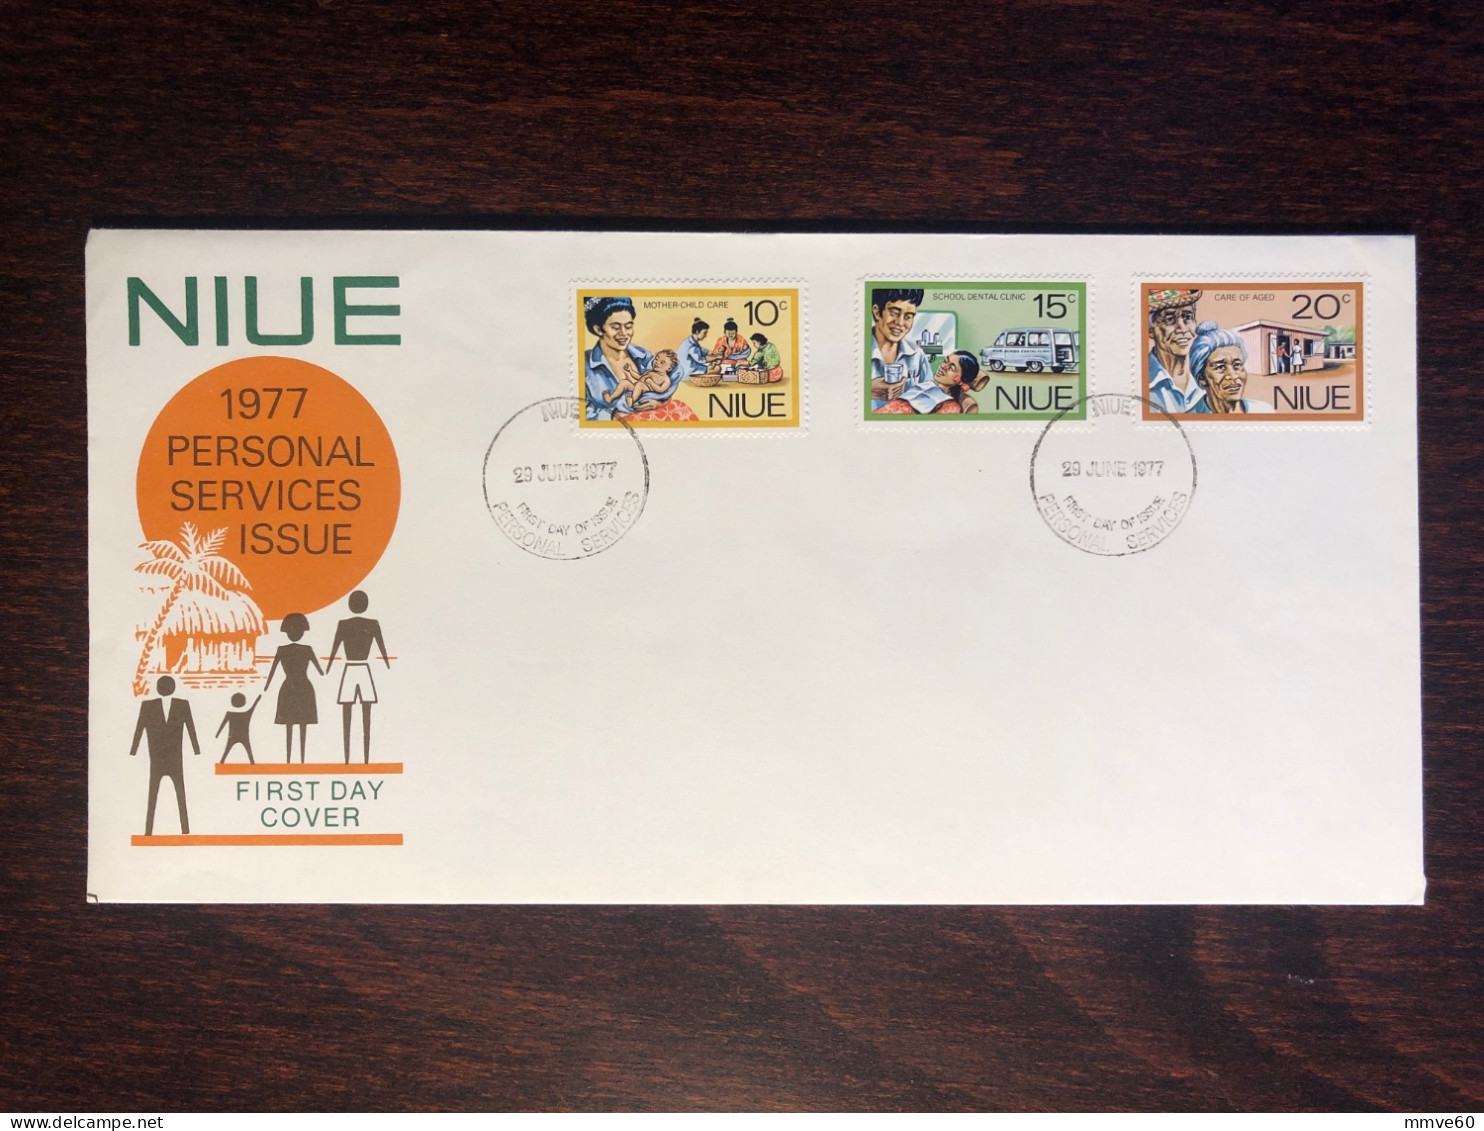 NIUE FDC COVER 1977 YEAR DENTAL CHILD CARE HEALTH MEDICINE STAMPS - Niue